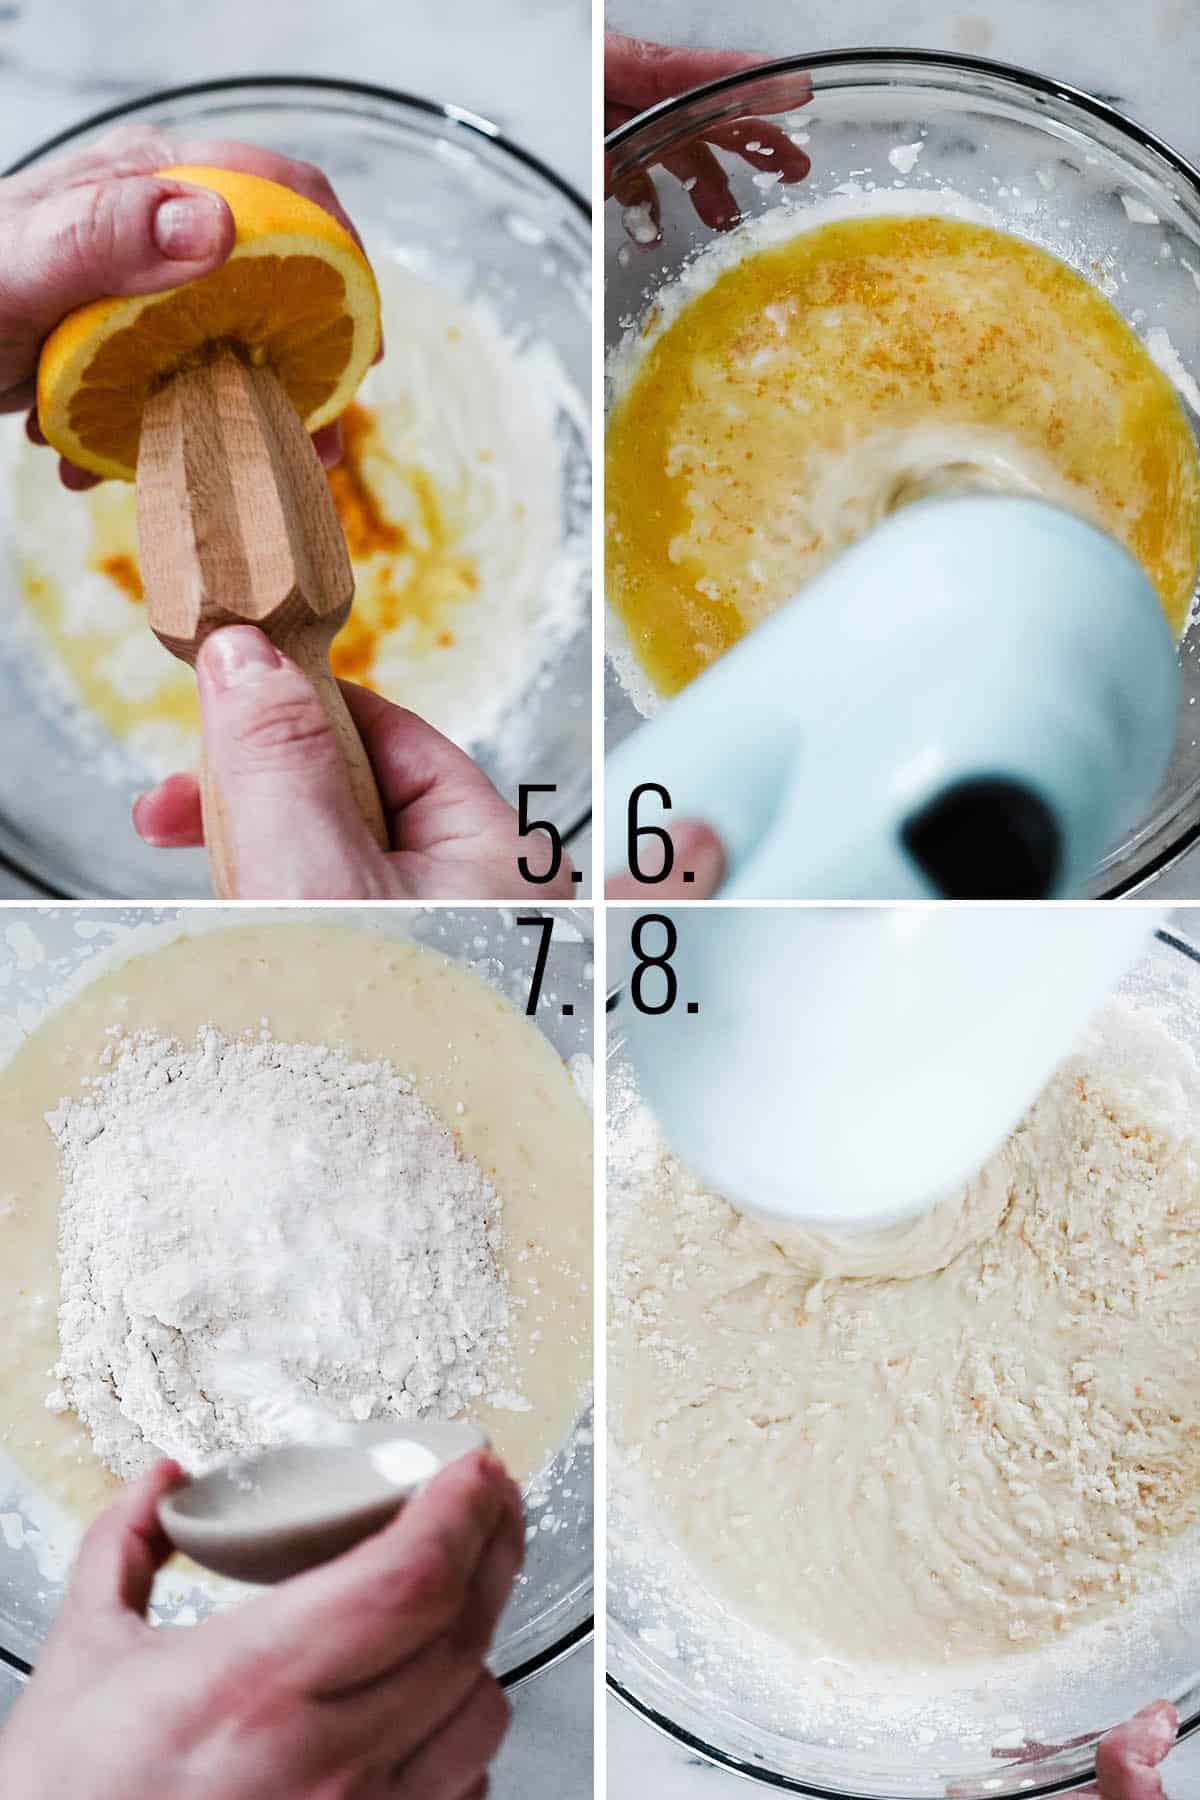 An orange being juiced, batter being mixed with flour and leveler.